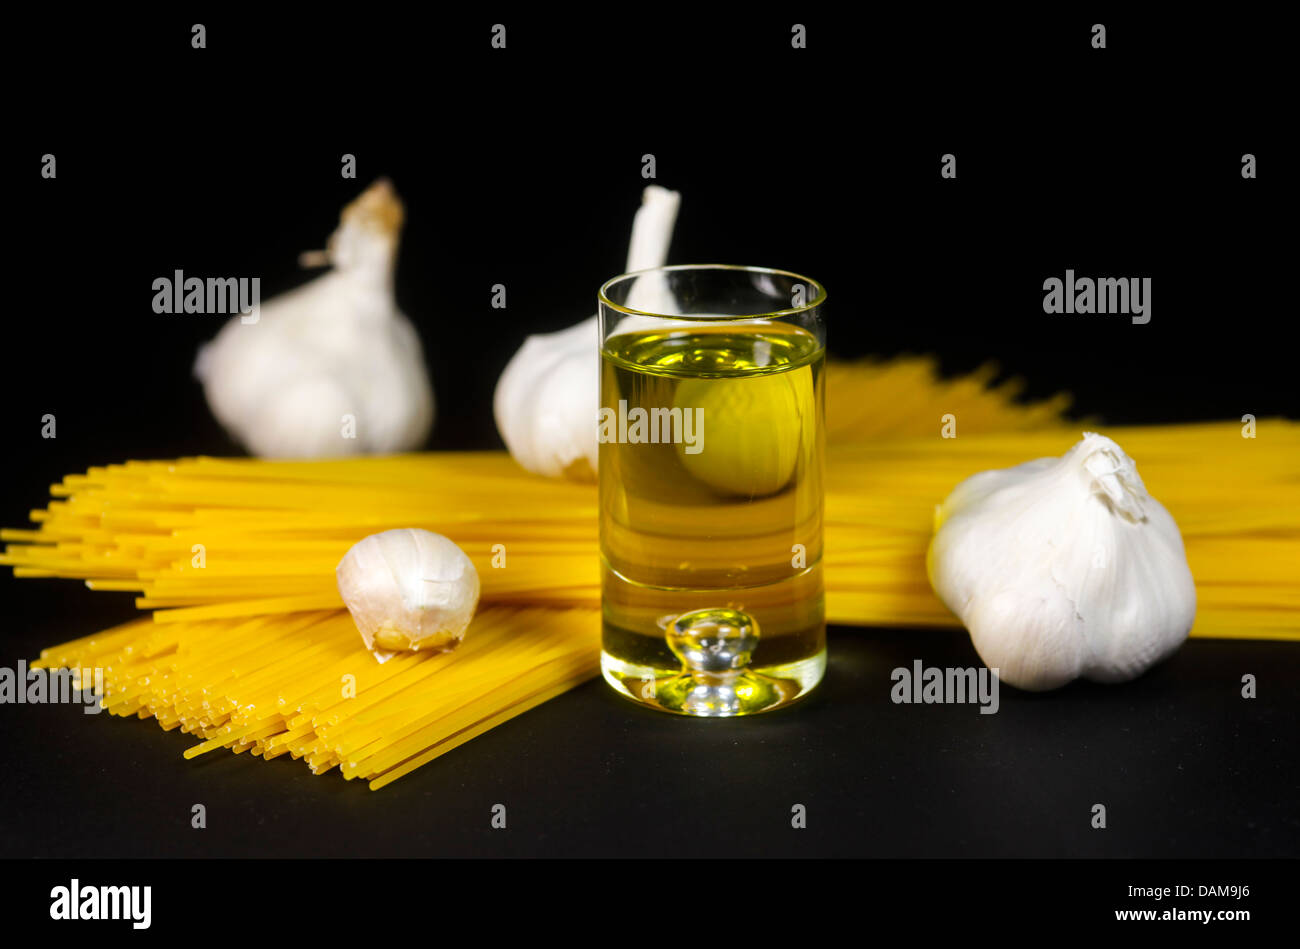 Glass of olive oil with spaghetti and garlics on black bakground, close up Stock Photo